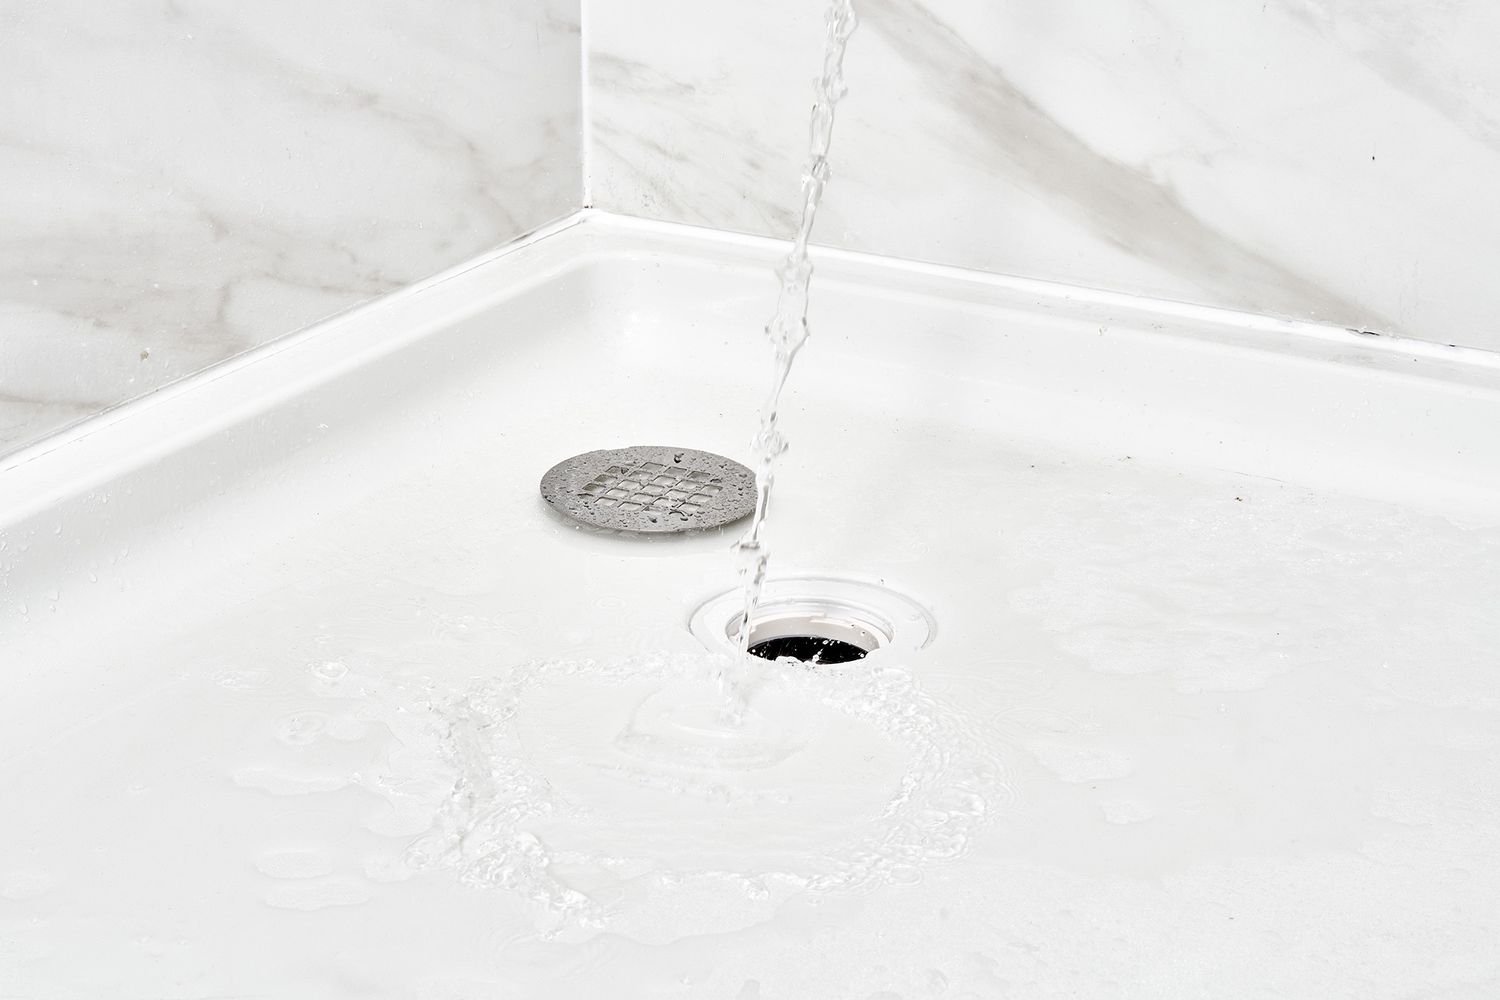 Shower drain flushed with water to loosen debris